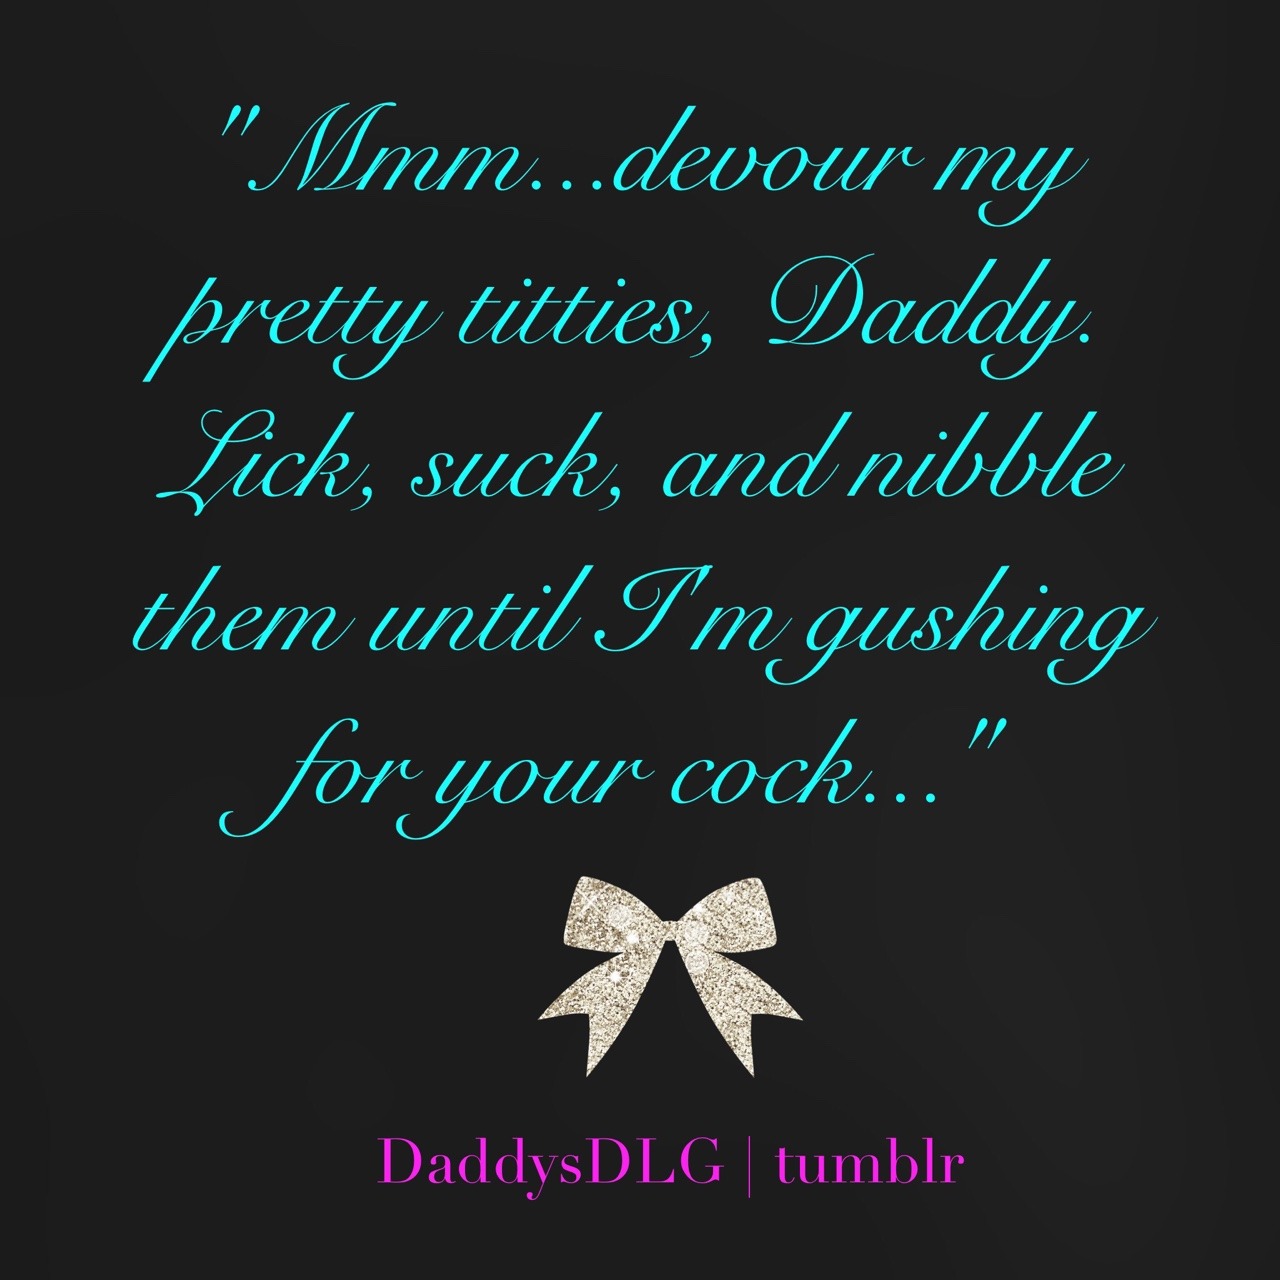 daddysdlg: Don’t be gentle…suck with an insatiable hunger; drive your baby girl